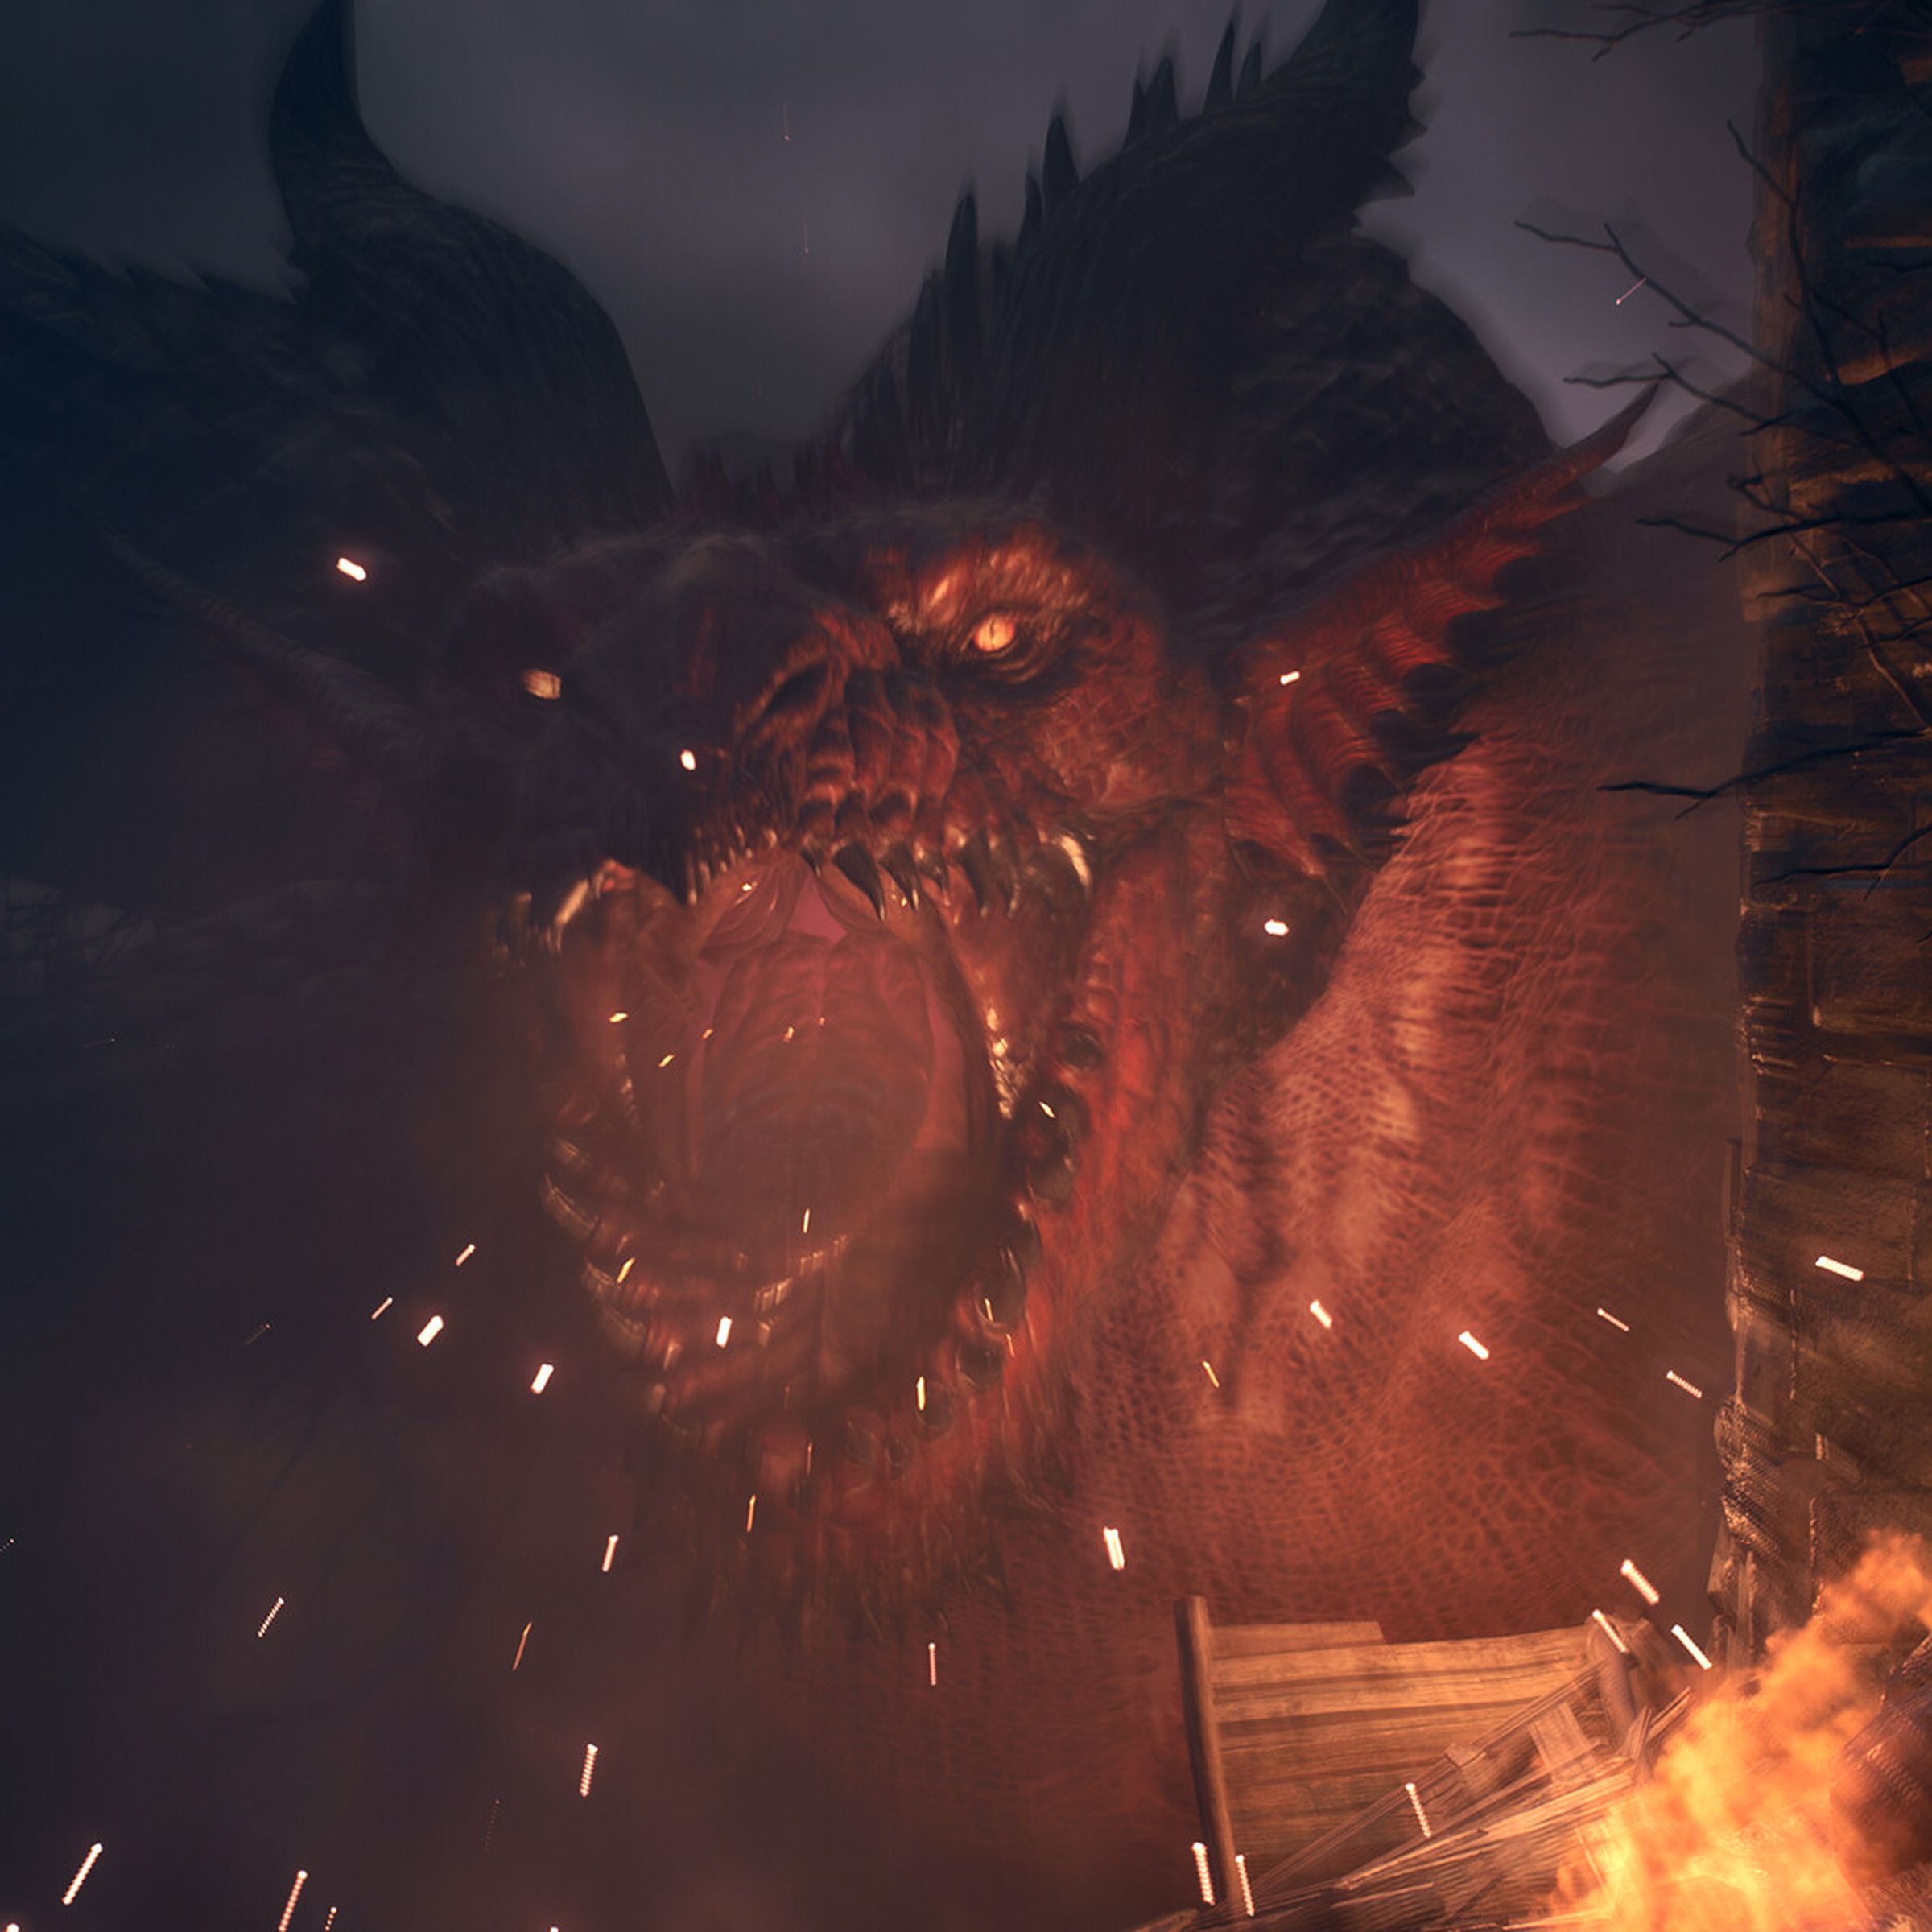 Screenshot from Dragon’s Dogma 2 featuring a large red dragon roaring as flames burn around the edges of the image